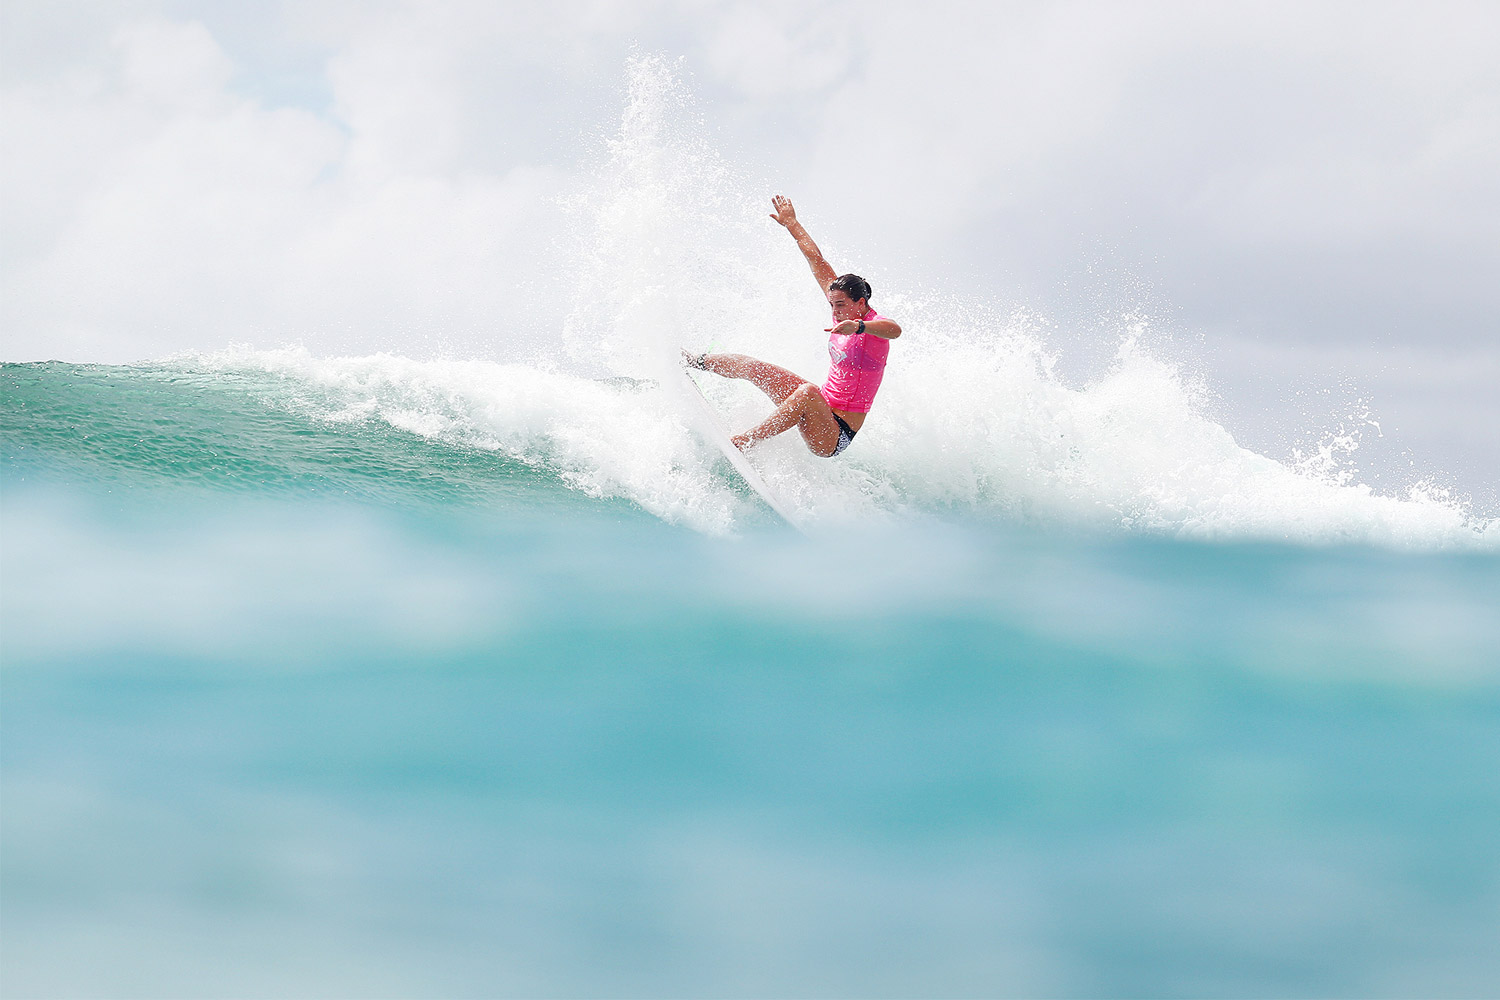 Quarterfinals kick off on Day 5 of the #ROXYpro